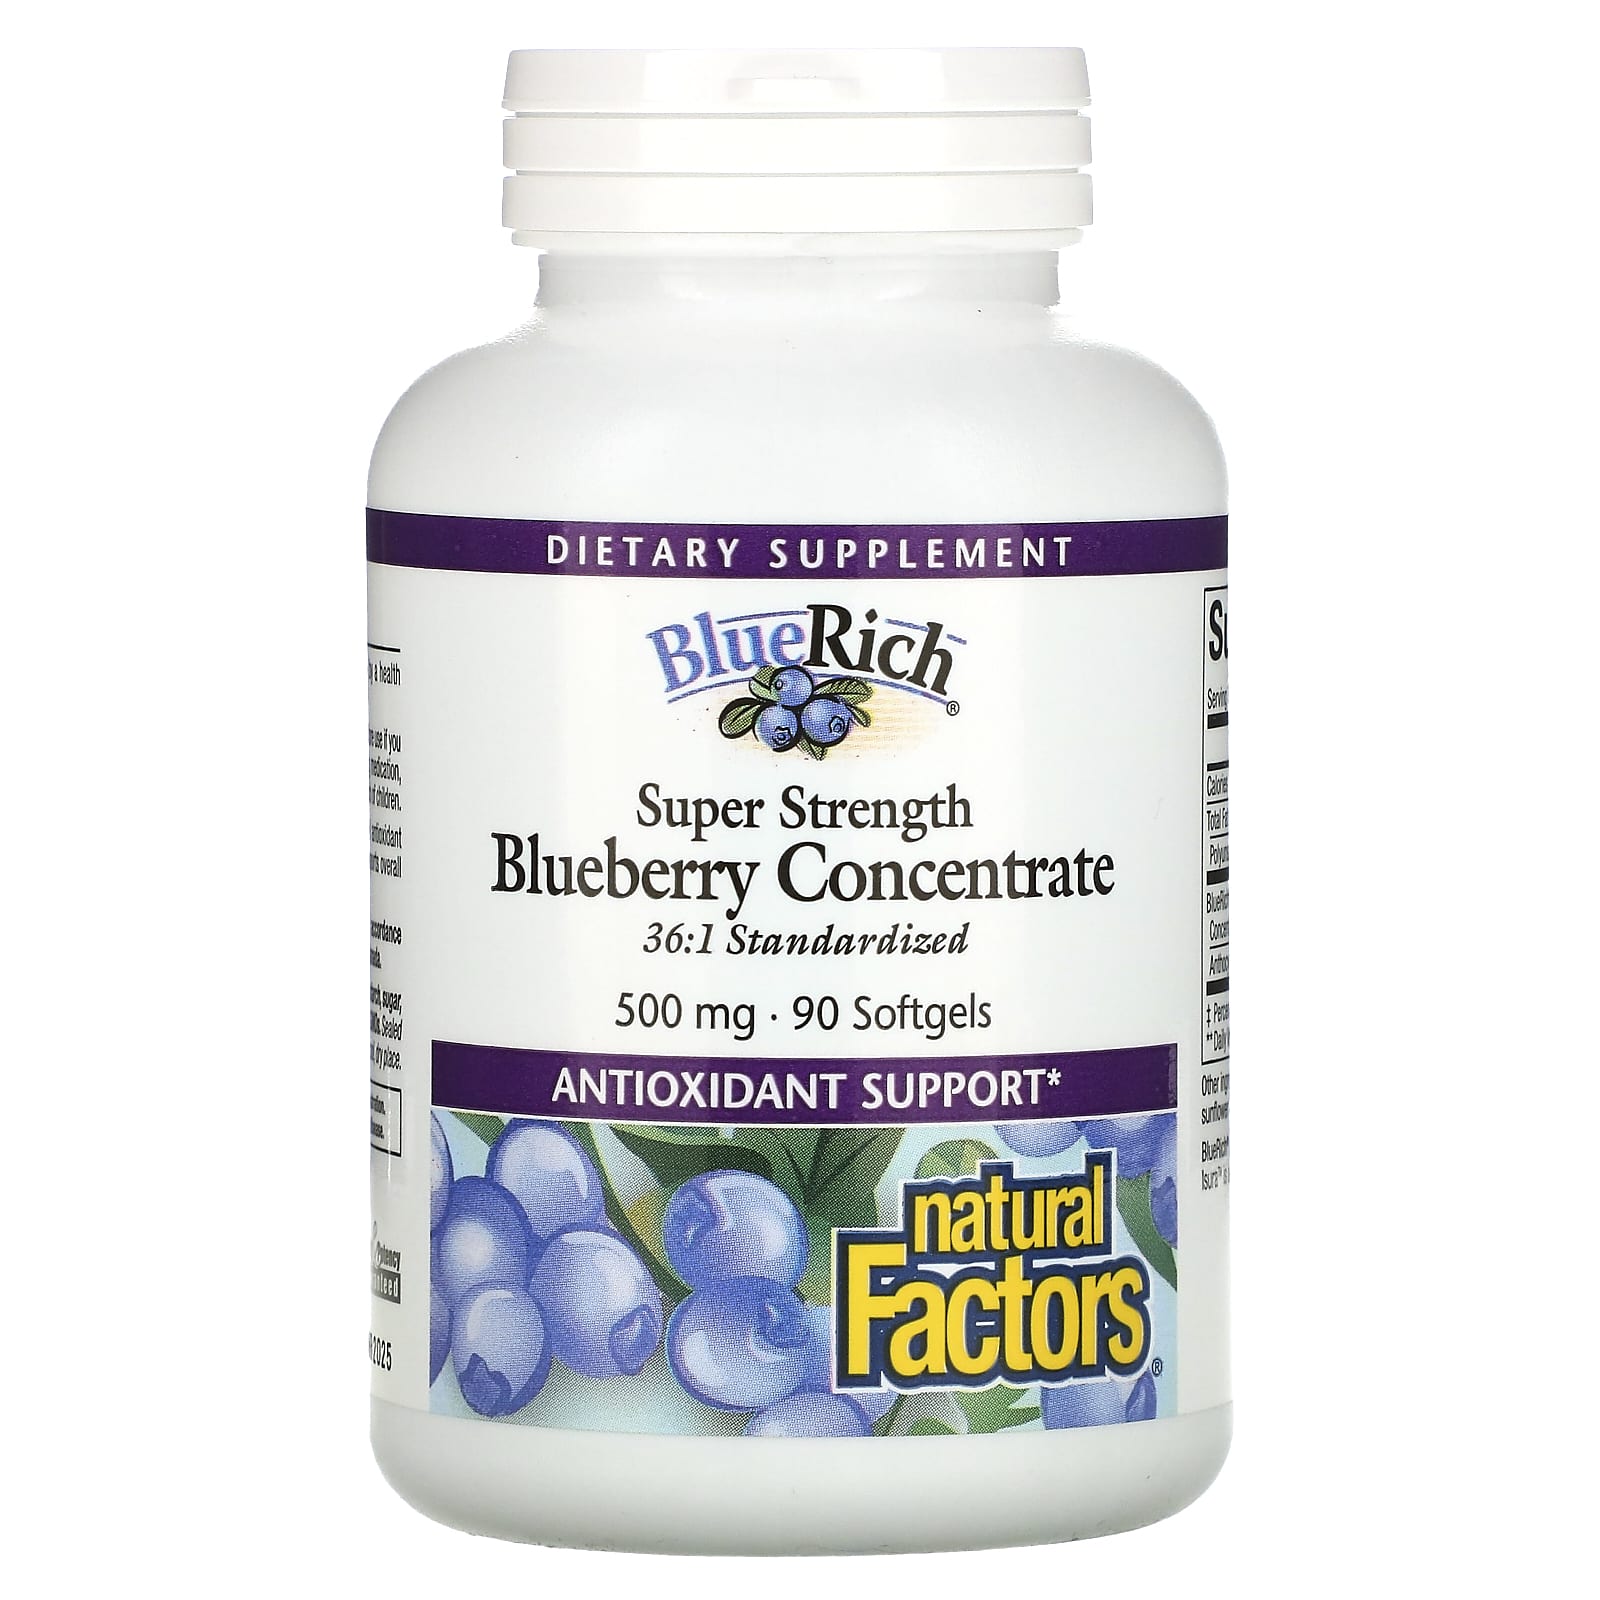 Natural Factors-BlueRich-Super Strength Blueberry Concentrate-500 mg-90 Softgels